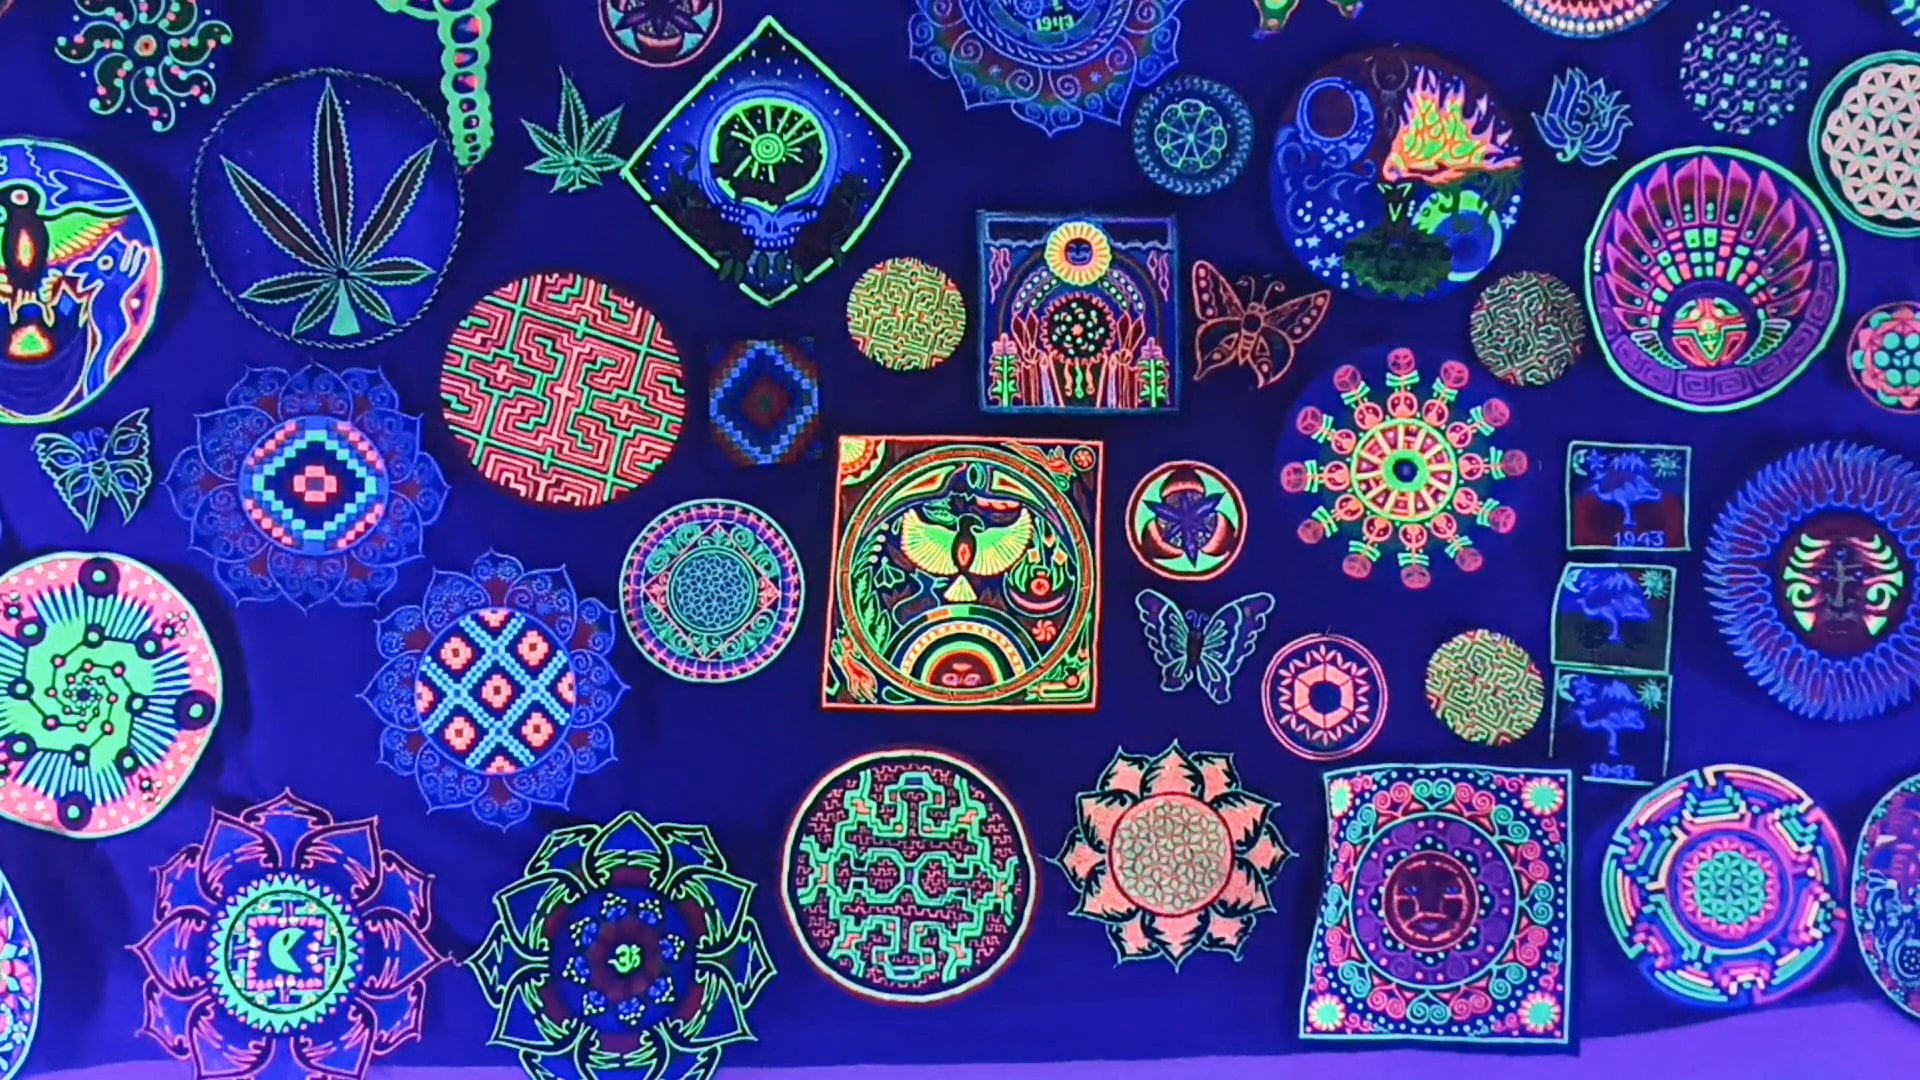 Ayahuasca Patch Visionary DMT Song Artwork Icaro Psychedelic Shipibo Conibo Embroidery Woven Songs of the Amazon Blacklight Glowing Art